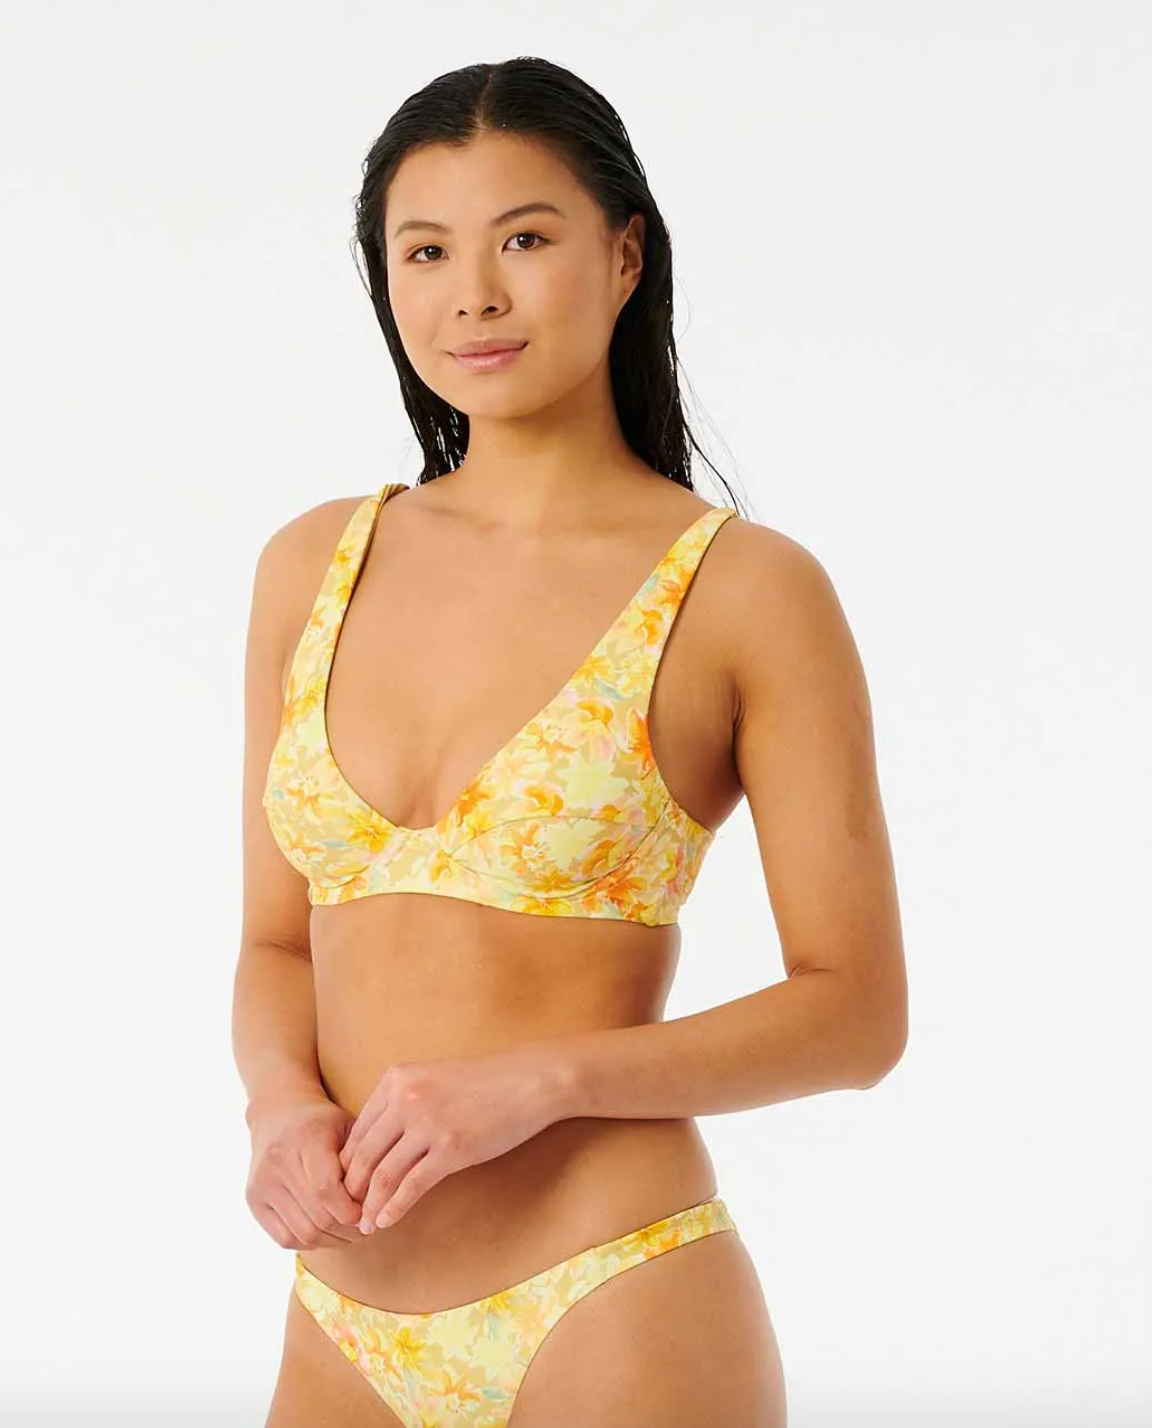 The Bra Fitter Diaries: Buying a Swimsuit in Your Bra Size - Broad